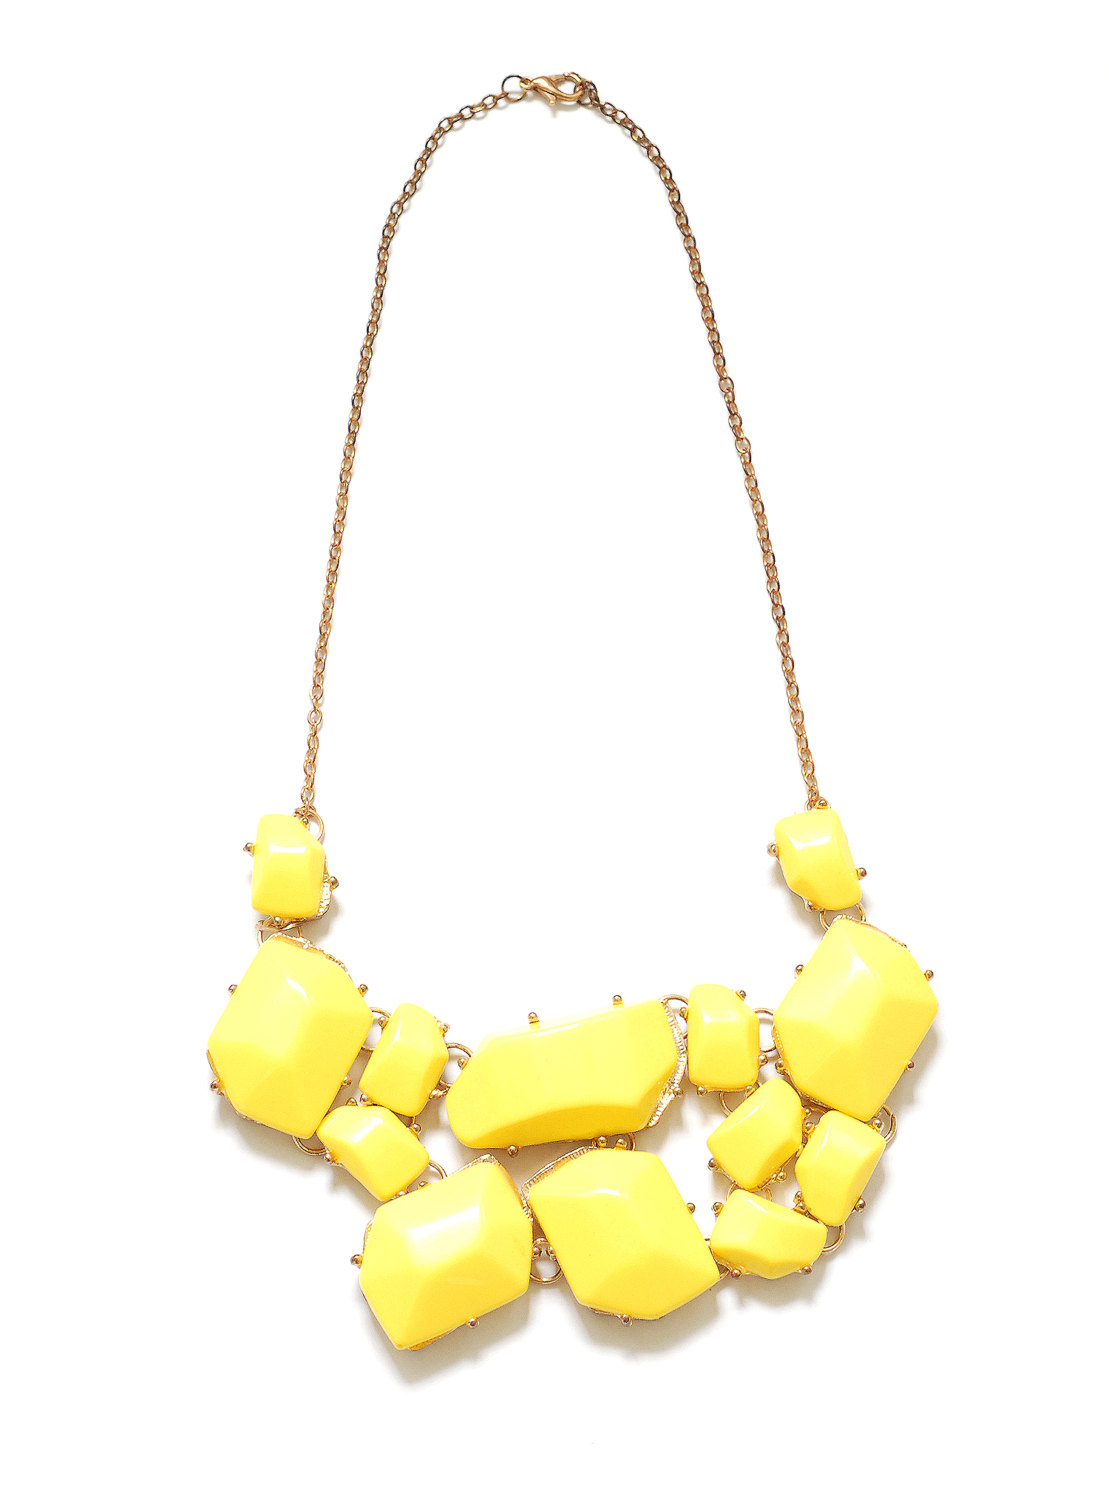 Yellow Bubble Statement Necklace, Yellow Statement Necklace